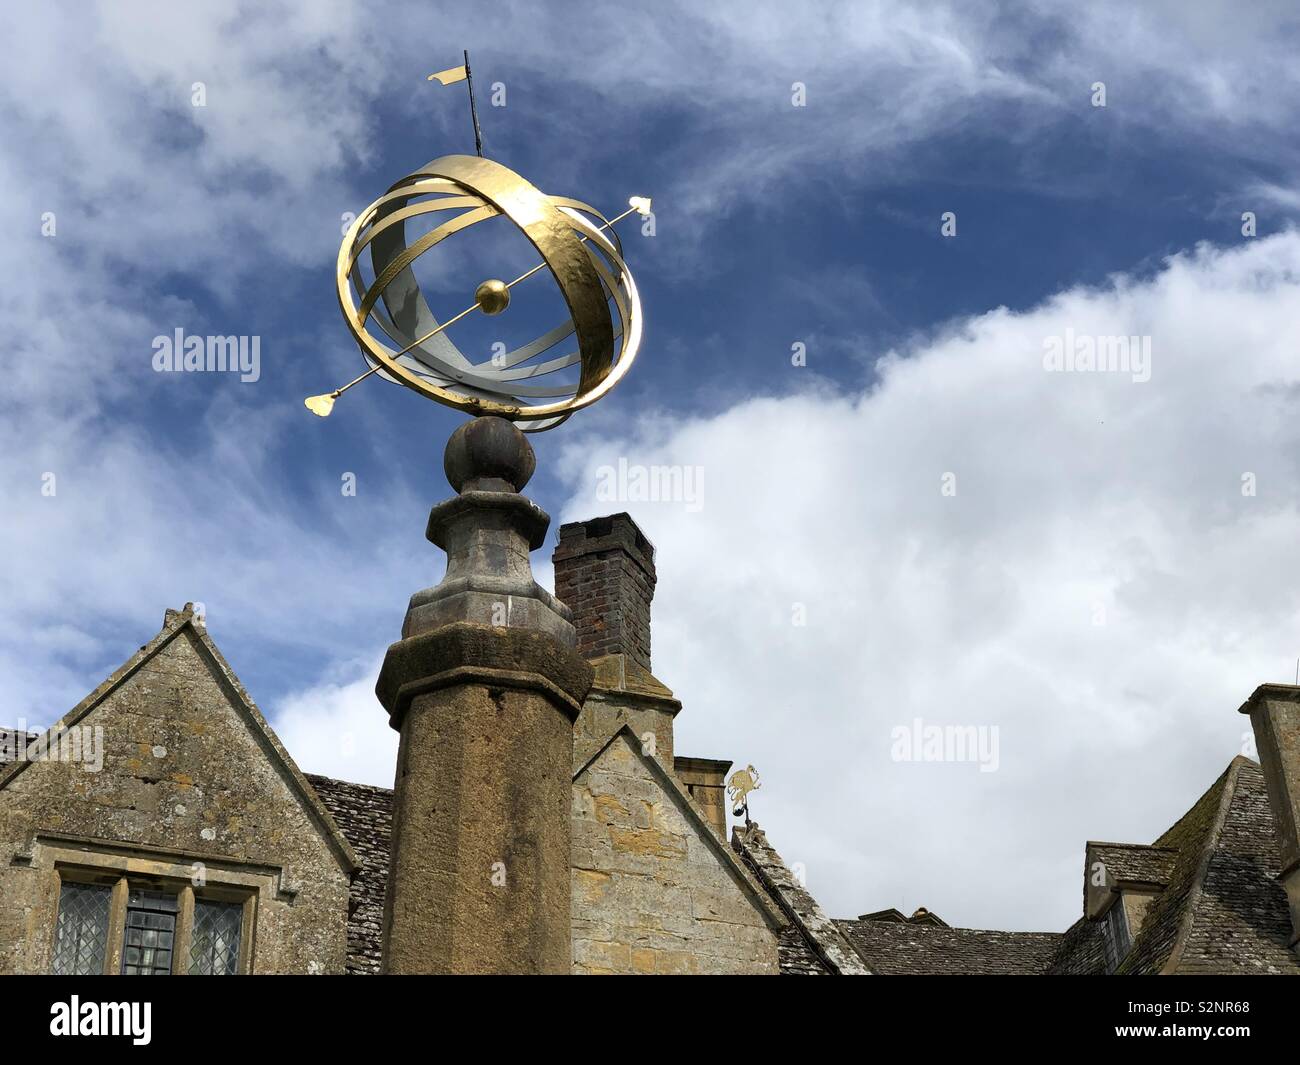 A gilded armillary sphere and roof lines at Snowshill Manor in the Cotswolds contrasted with vivid blue skies and stormy clouds. Stock Photo